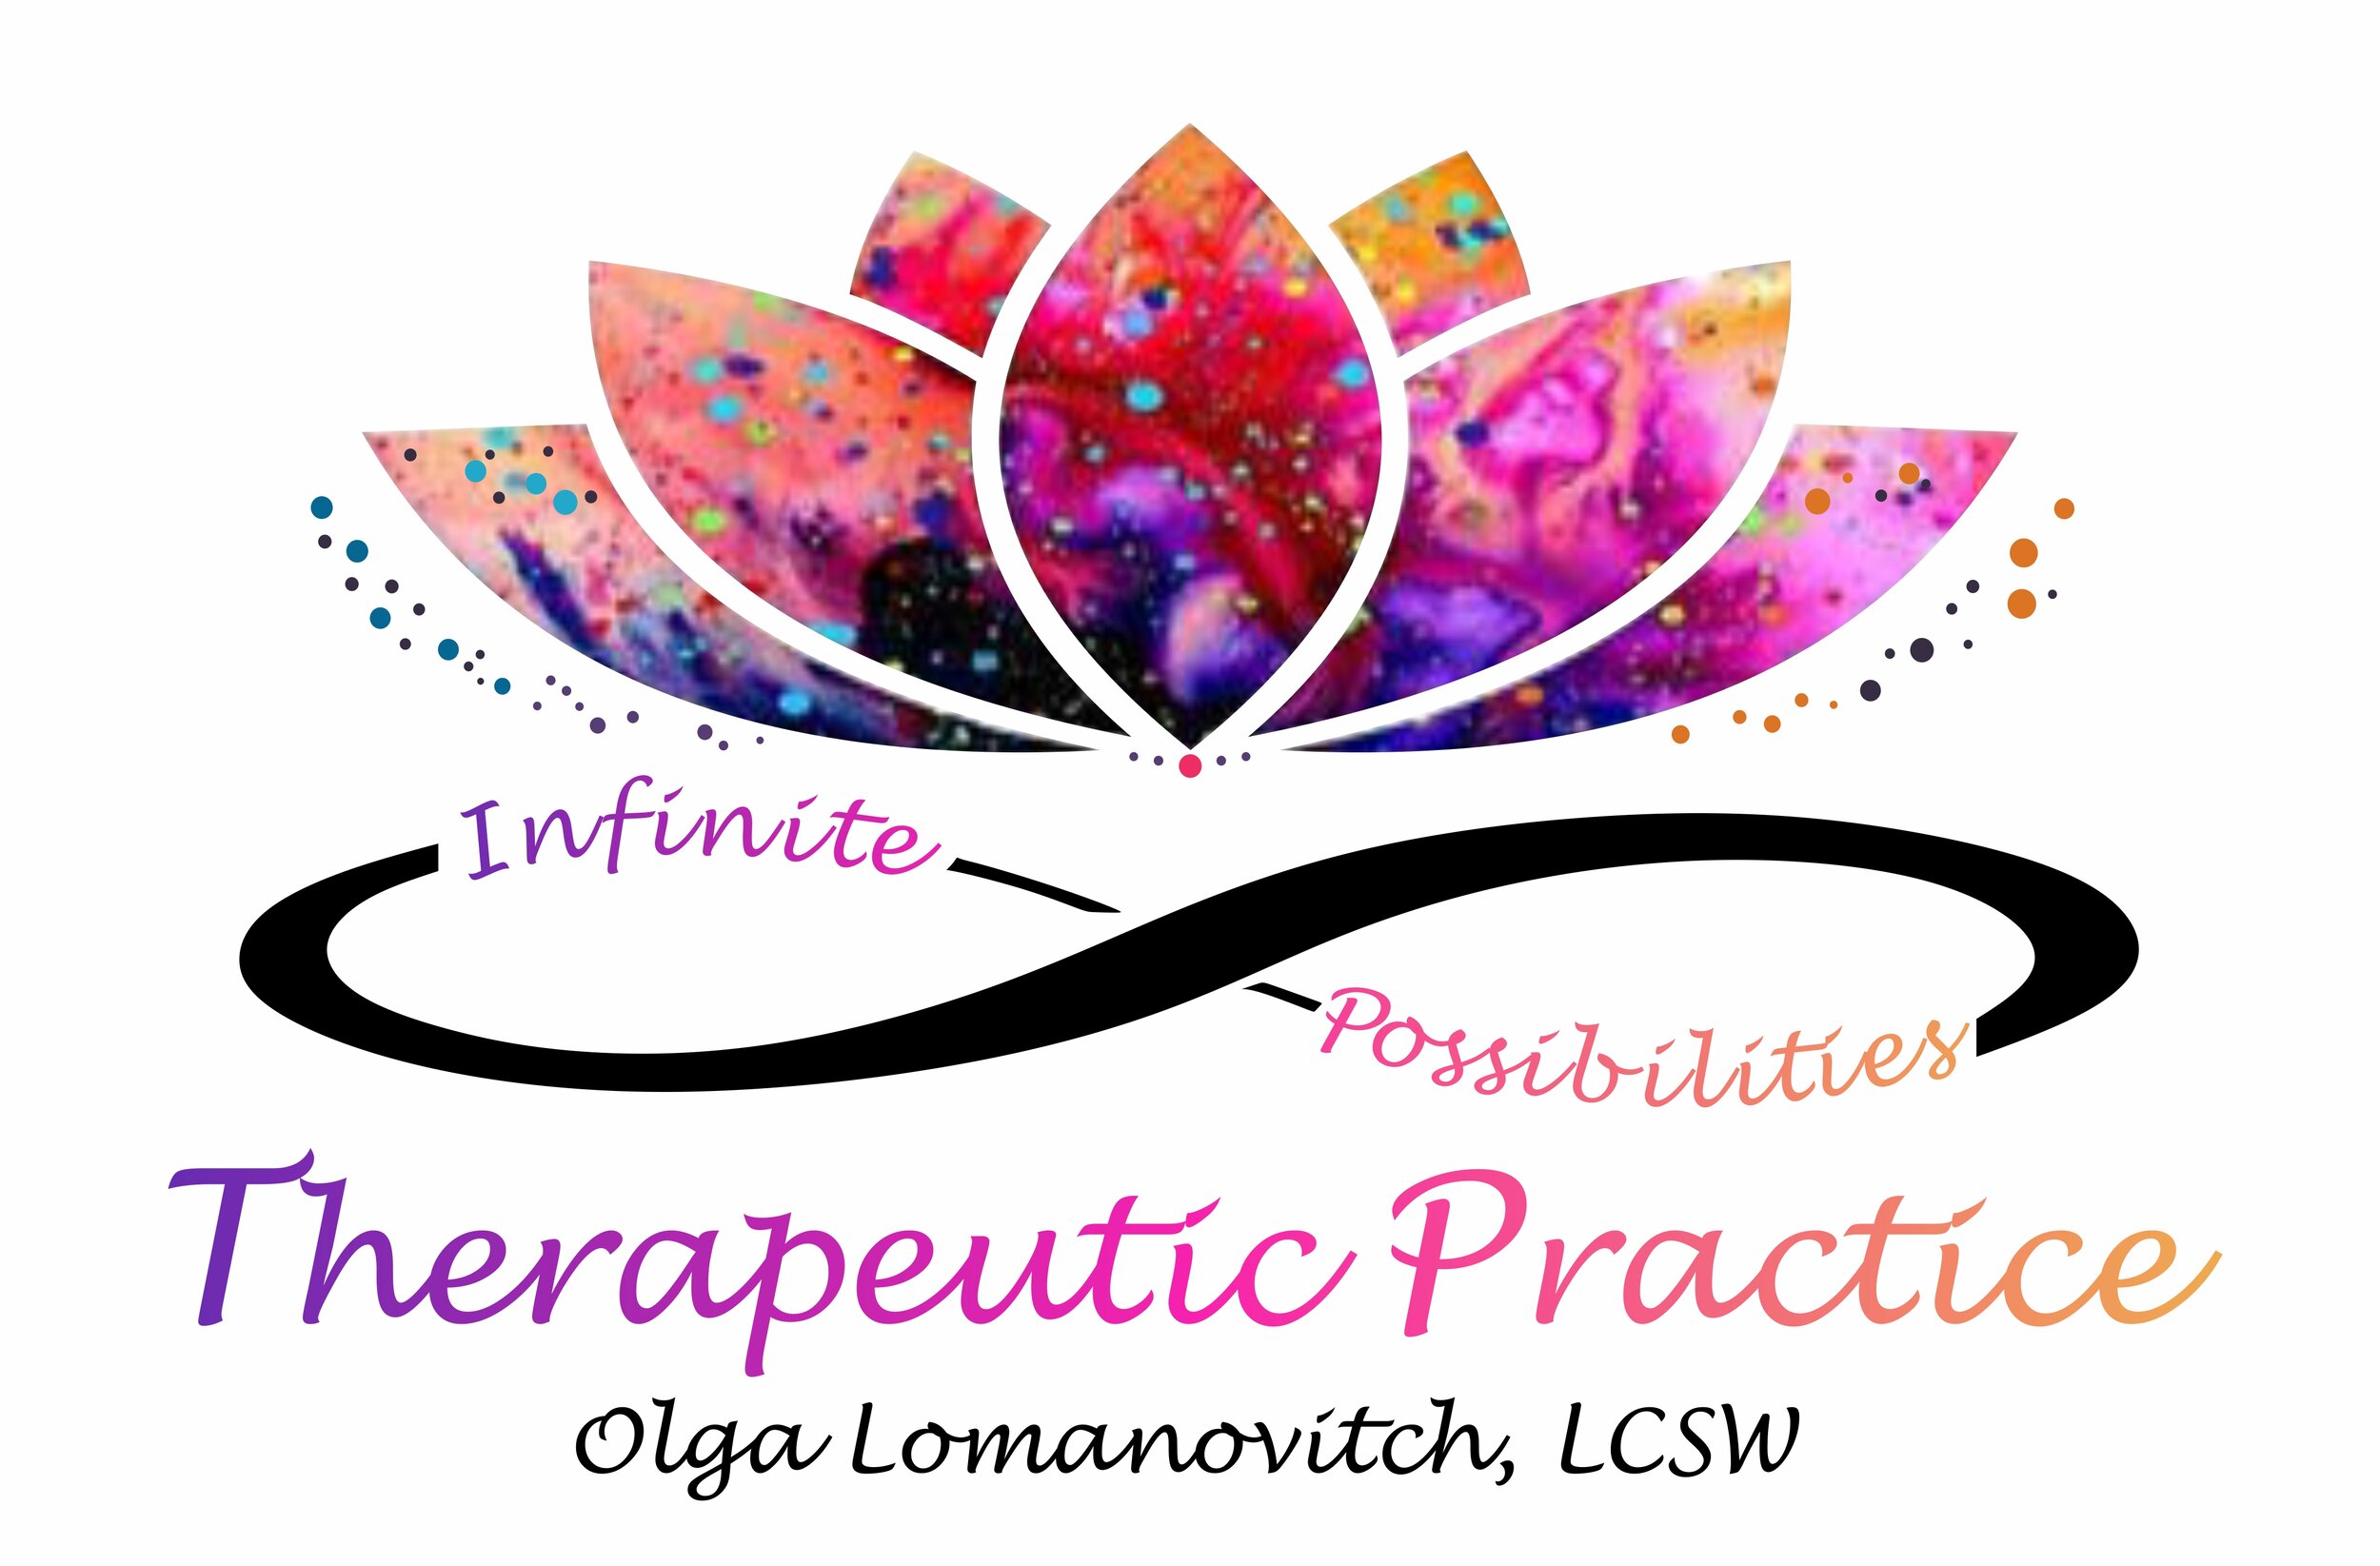 LGBTQIA+ affirming therapist. Specializing in trauma, PTSD, addiction, self  esteem. Philadelphia and online. Using CBT, Gestalt therapy, mindfulness,  health at every size.